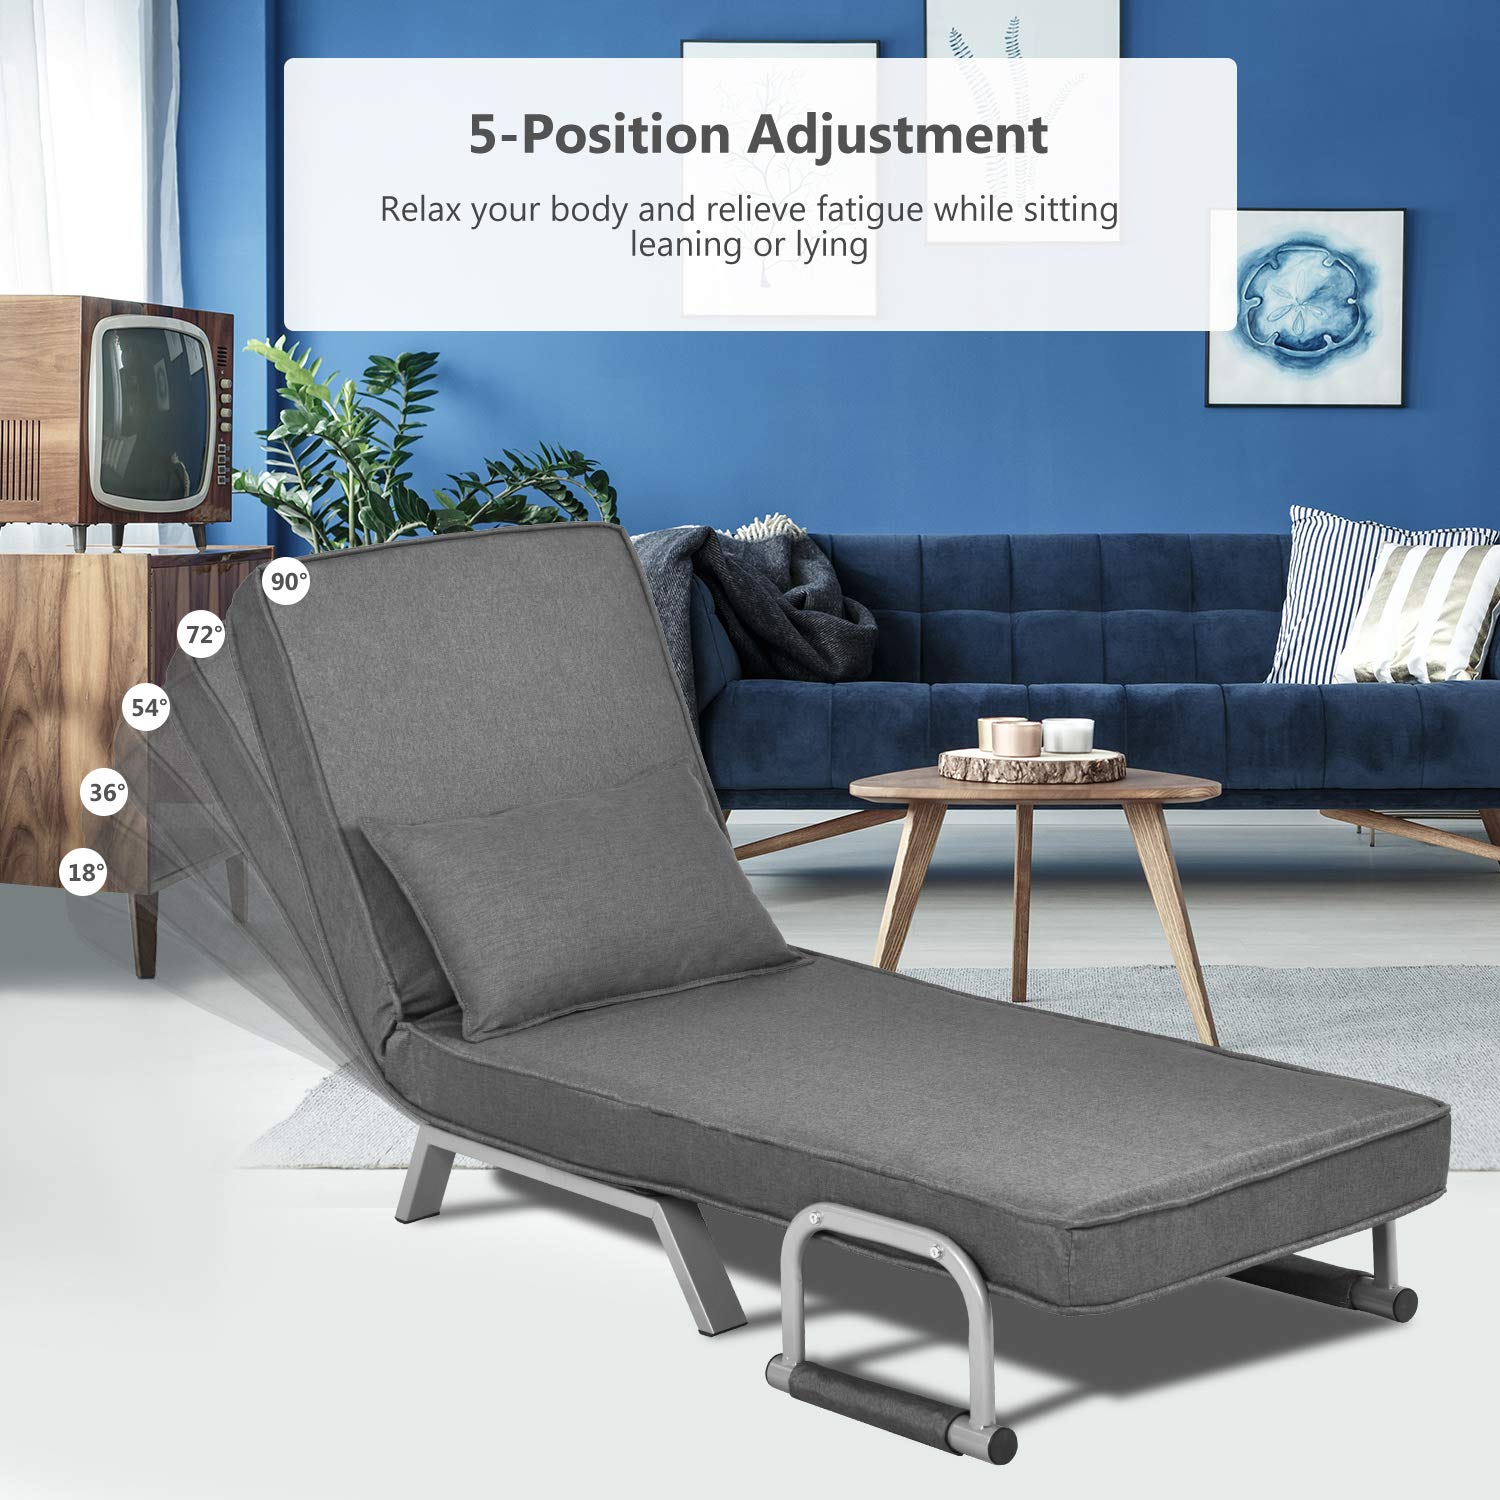 Convertible Sofa Bed Sleeper Chair, Modern Chaise Lounge 5 Position Adjustable Backrest, Folding Arm Chair Sleeper with Pillow, Upholstered Seat, Couch for Bedroom Home Office, Grey